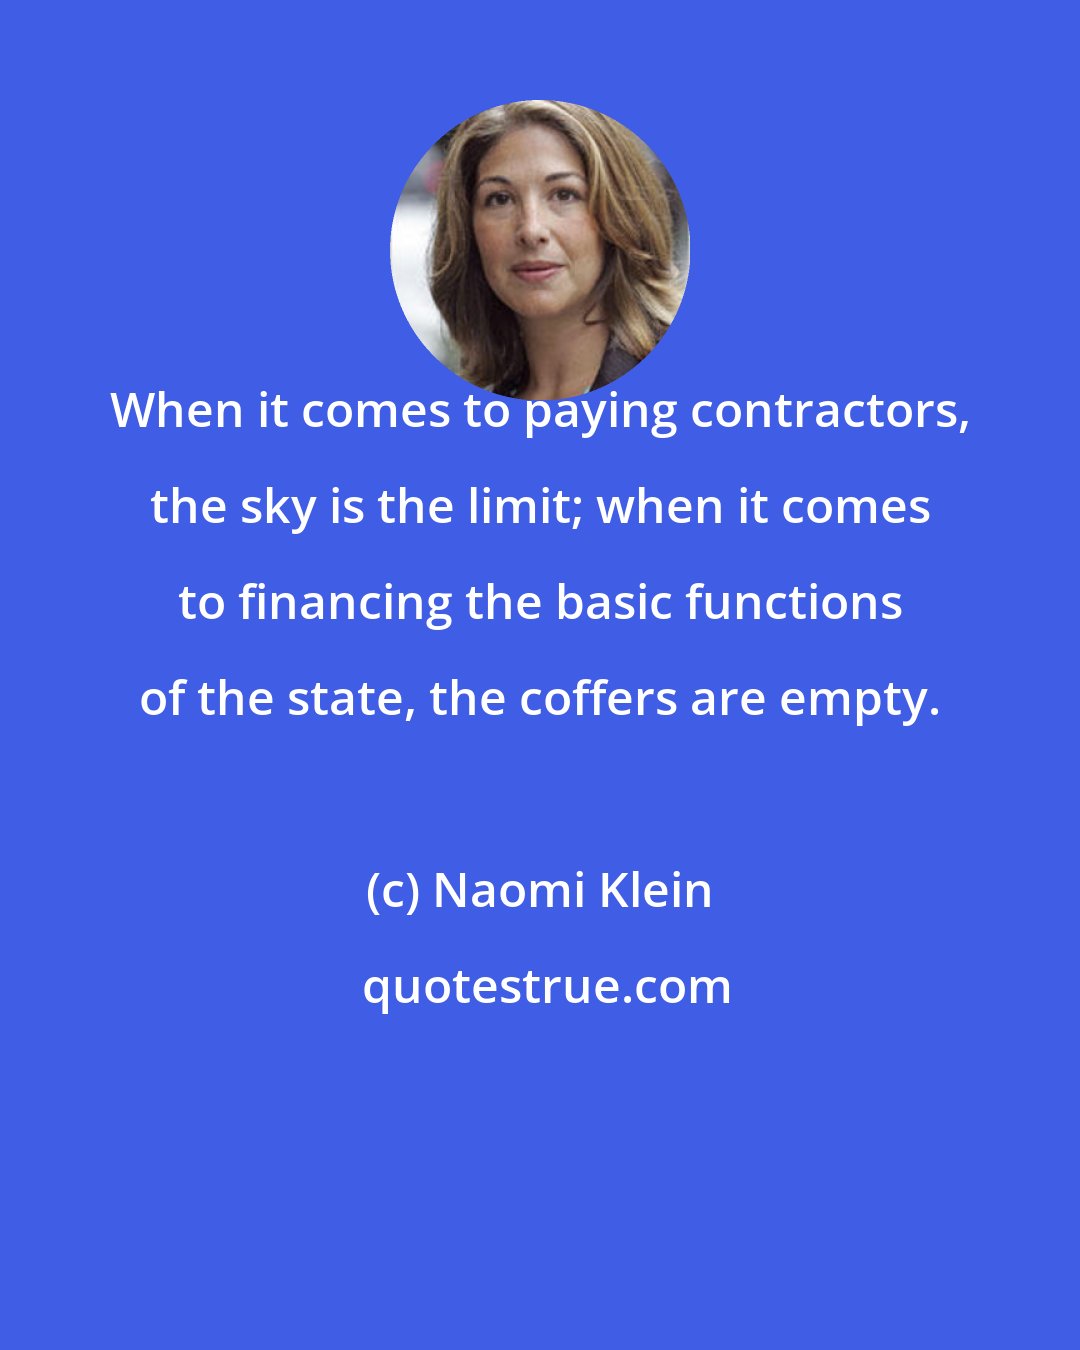 Naomi Klein: When it comes to paying contractors, the sky is the limit; when it comes to financing the basic functions of the state, the coffers are empty.